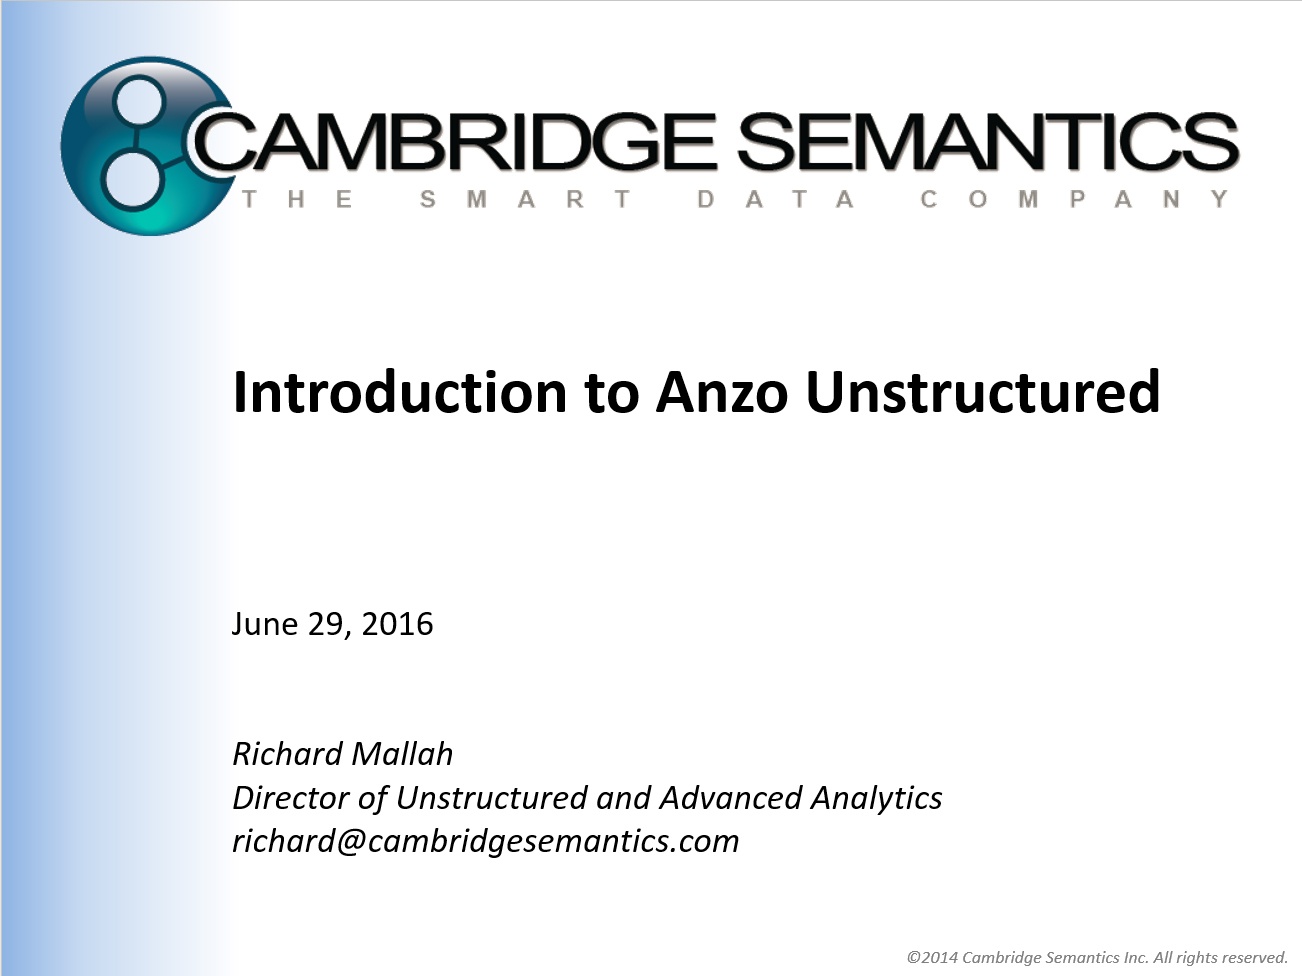 introduction_to_anzo_unstructured.jpg